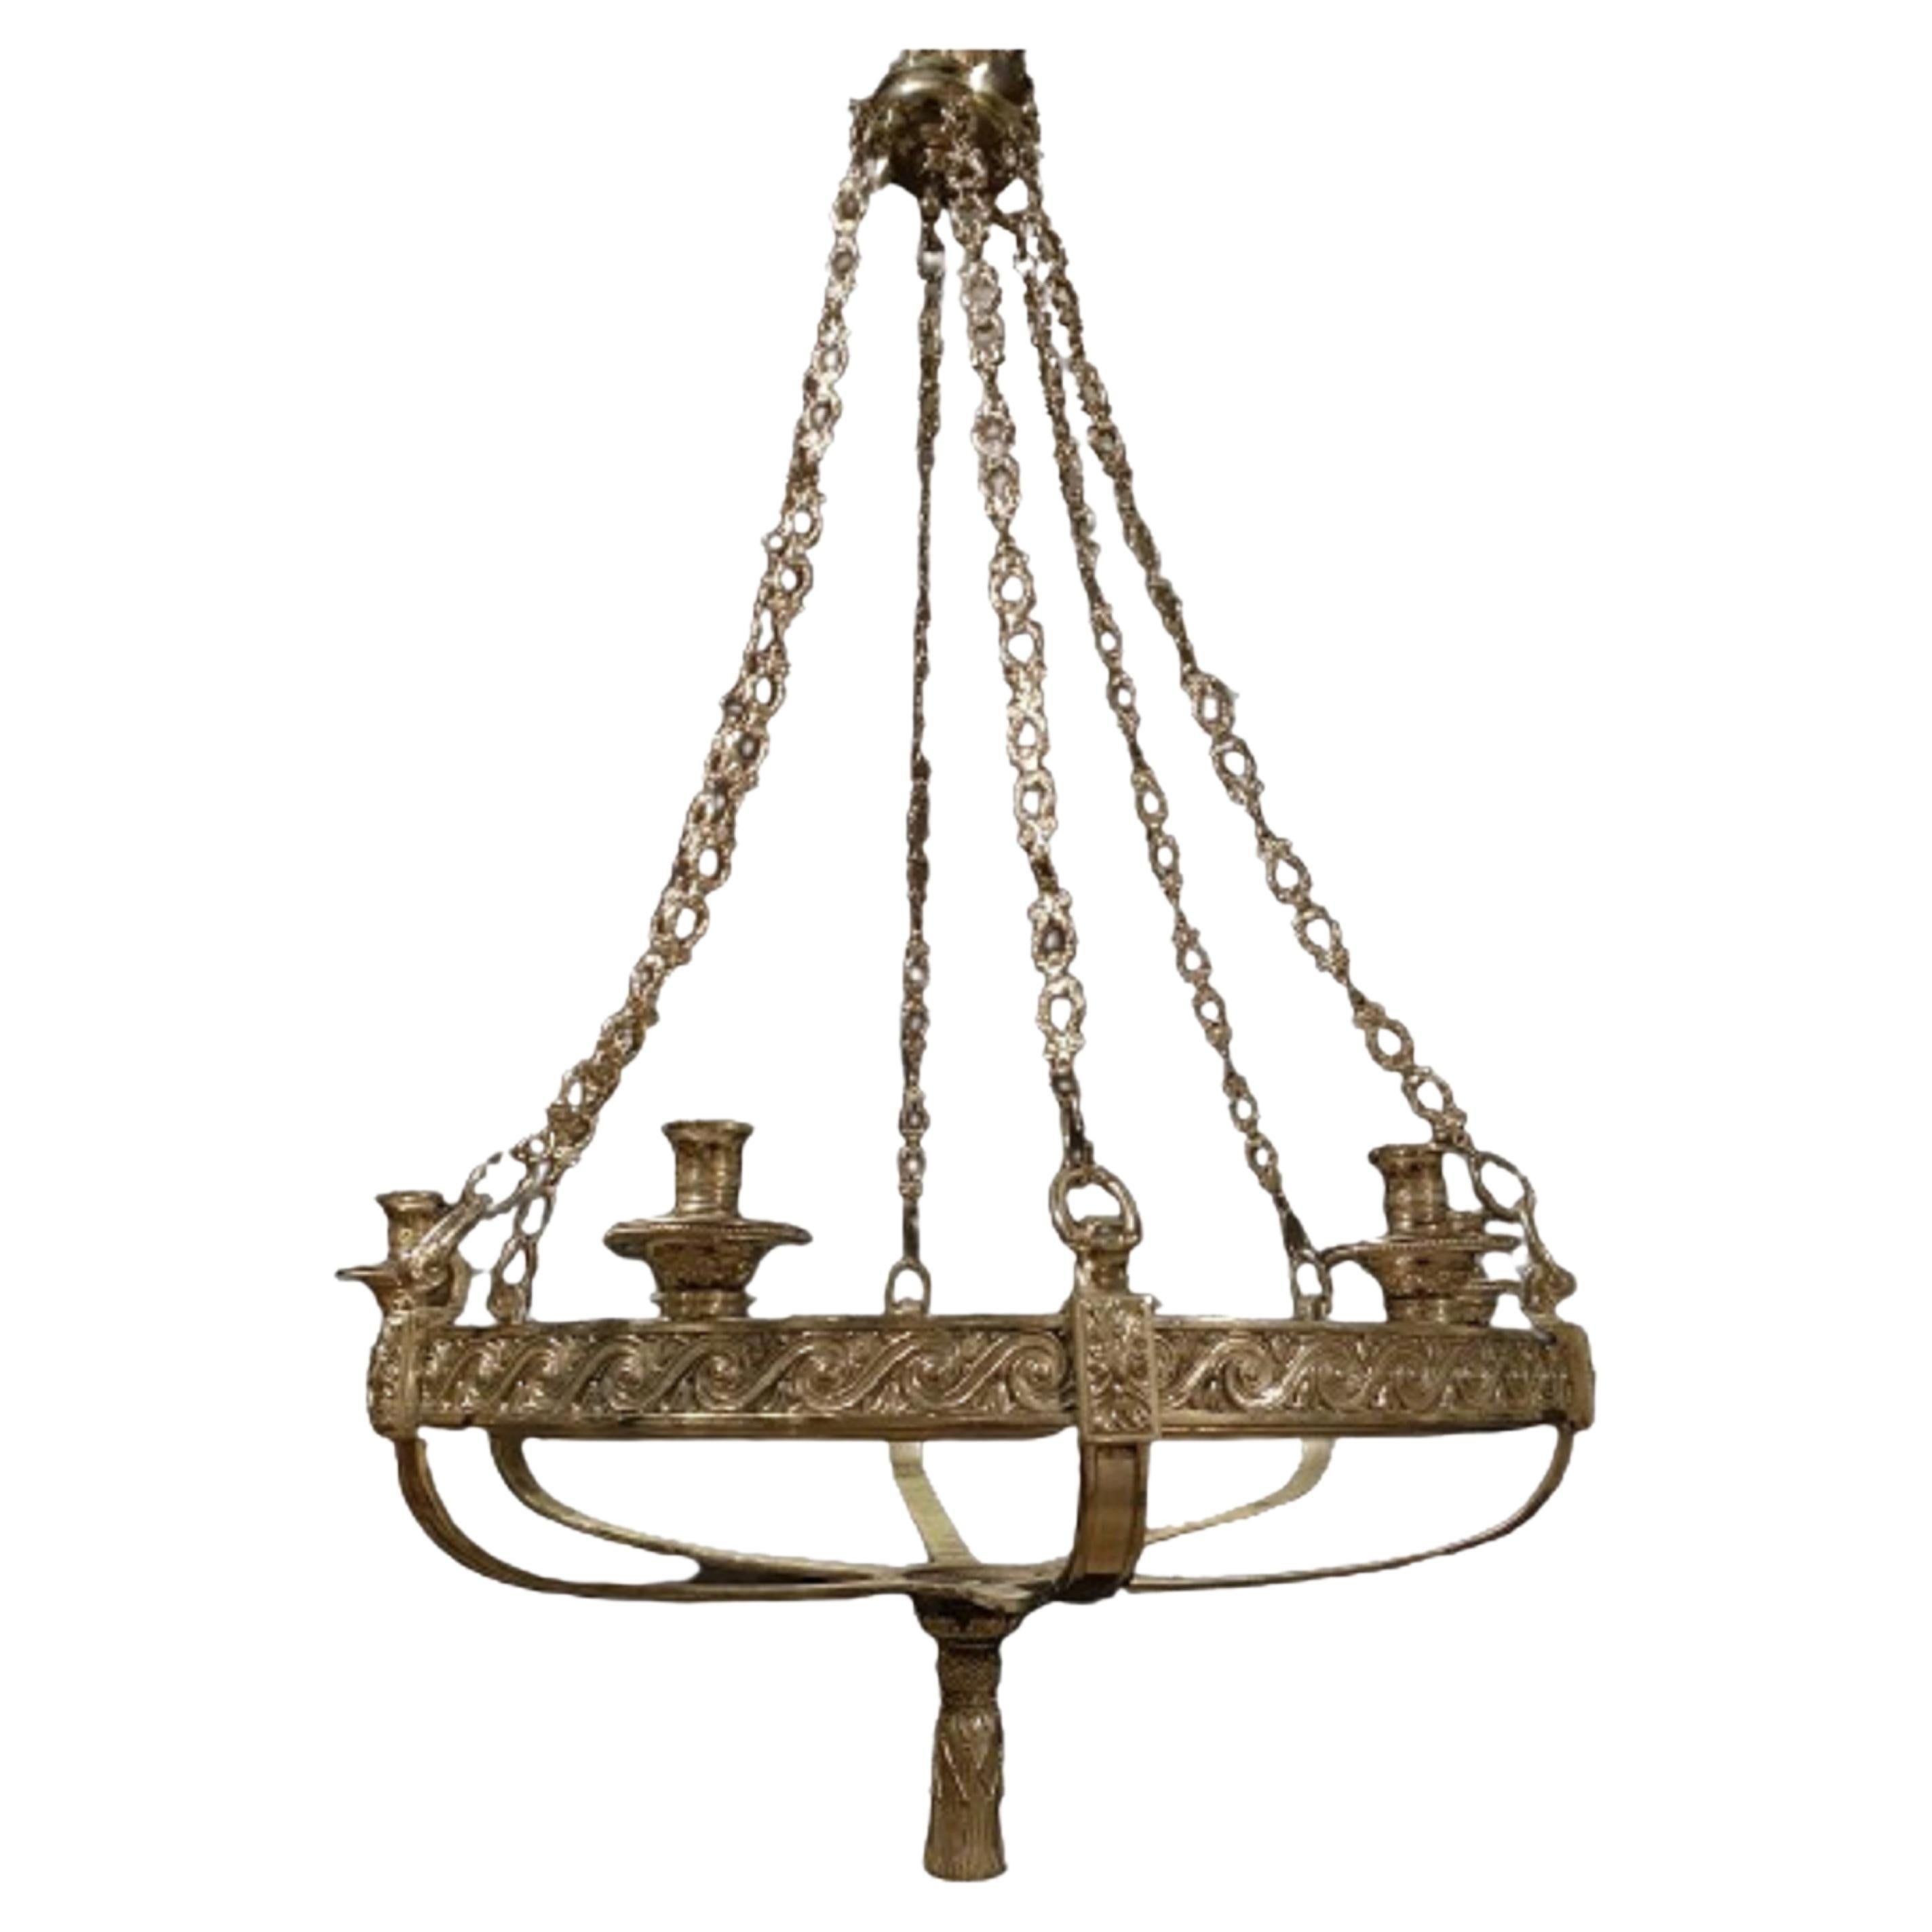 1900’s Caldwell Neoclassical Silver Plated Chandelier For Sale